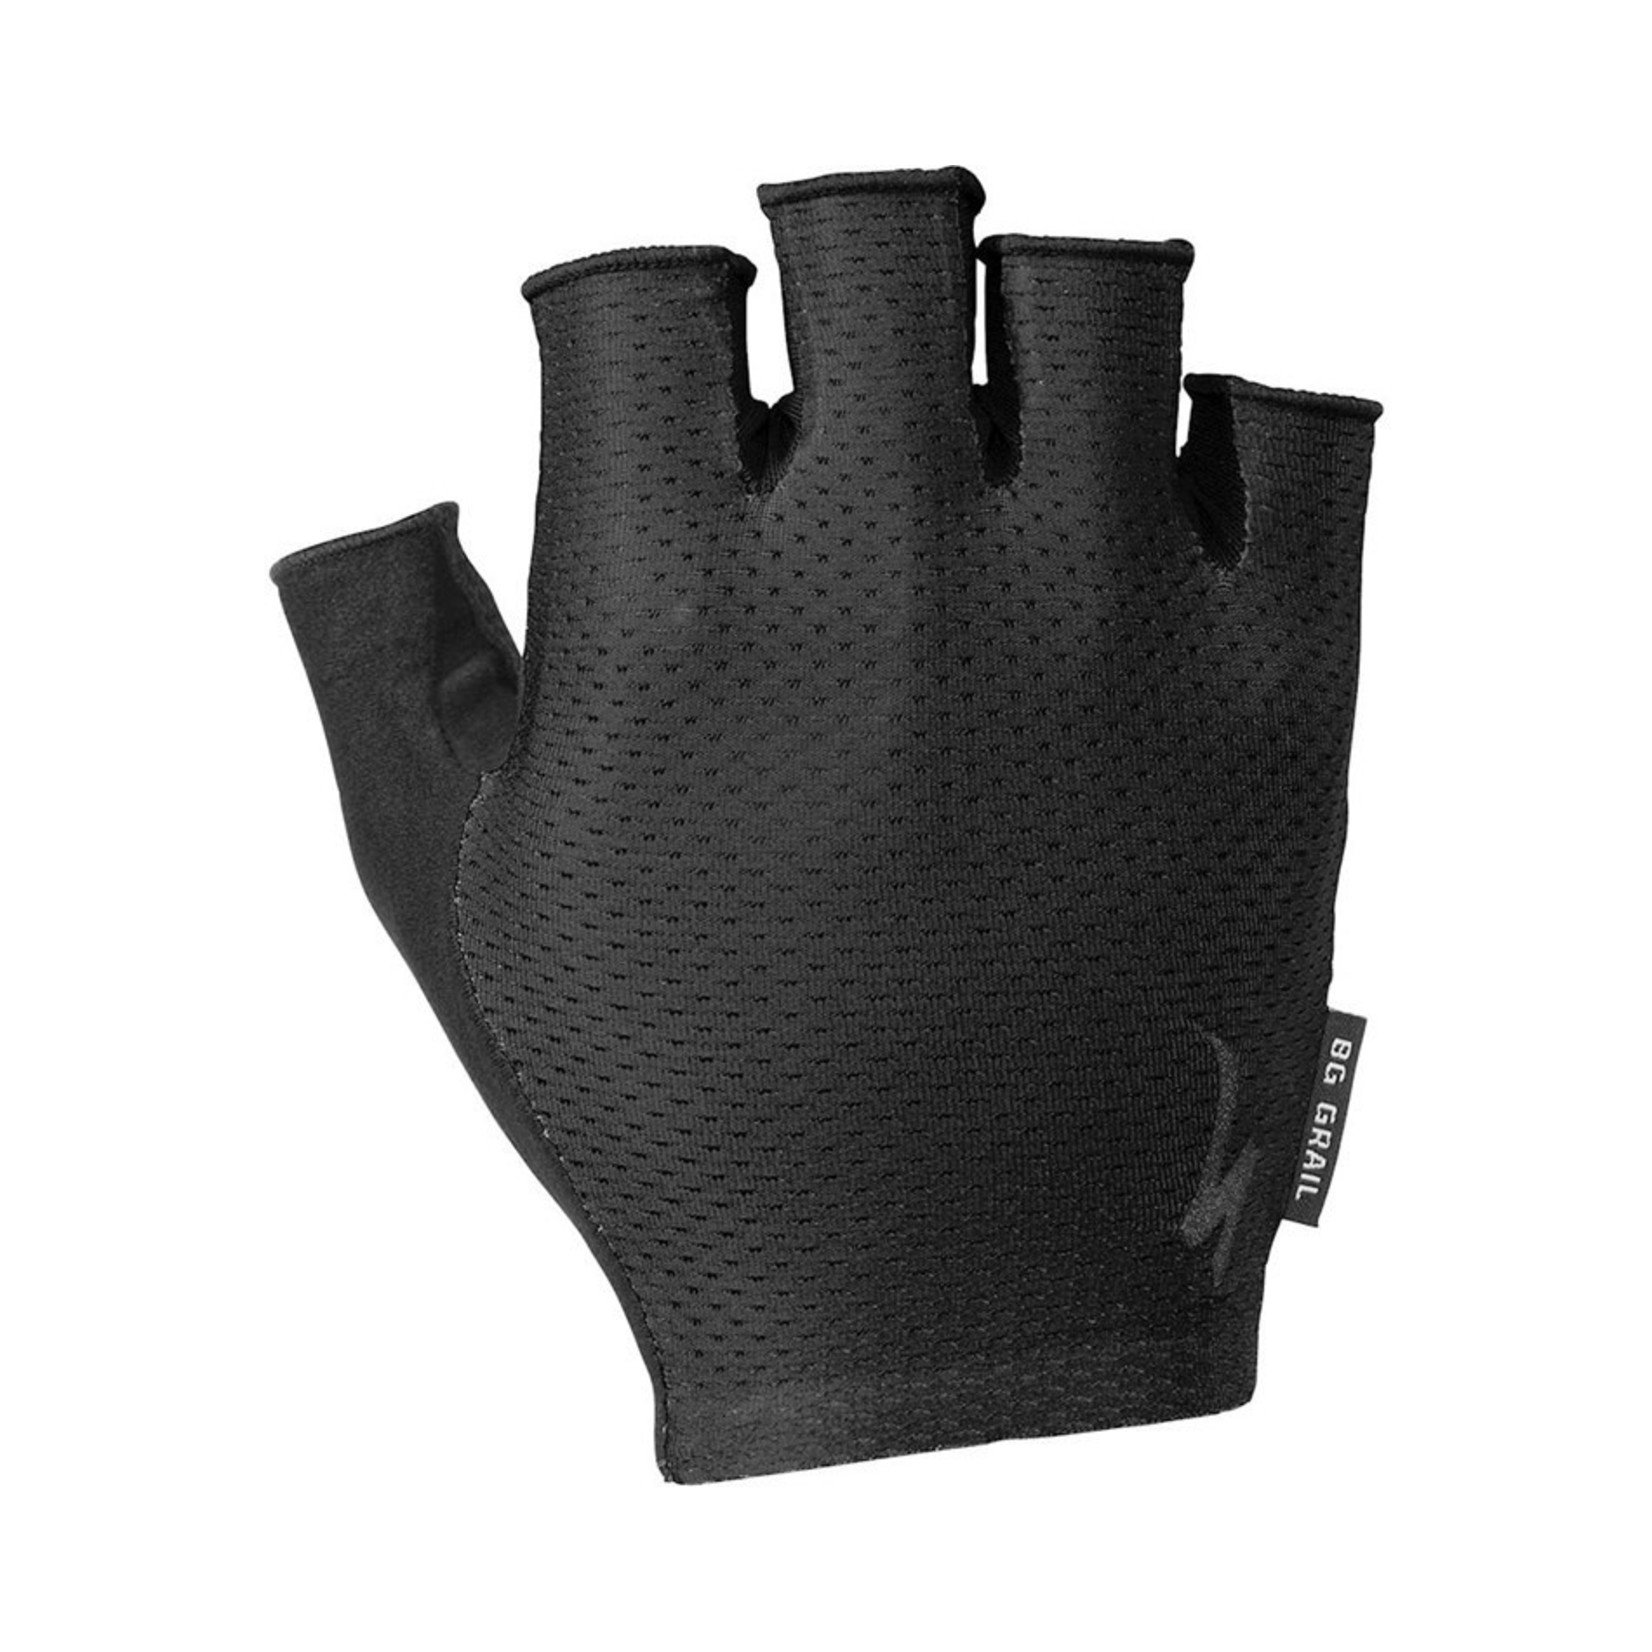 SPECIALIZED BG GRAIL GLOVE SF WMN - Wembley Cycles